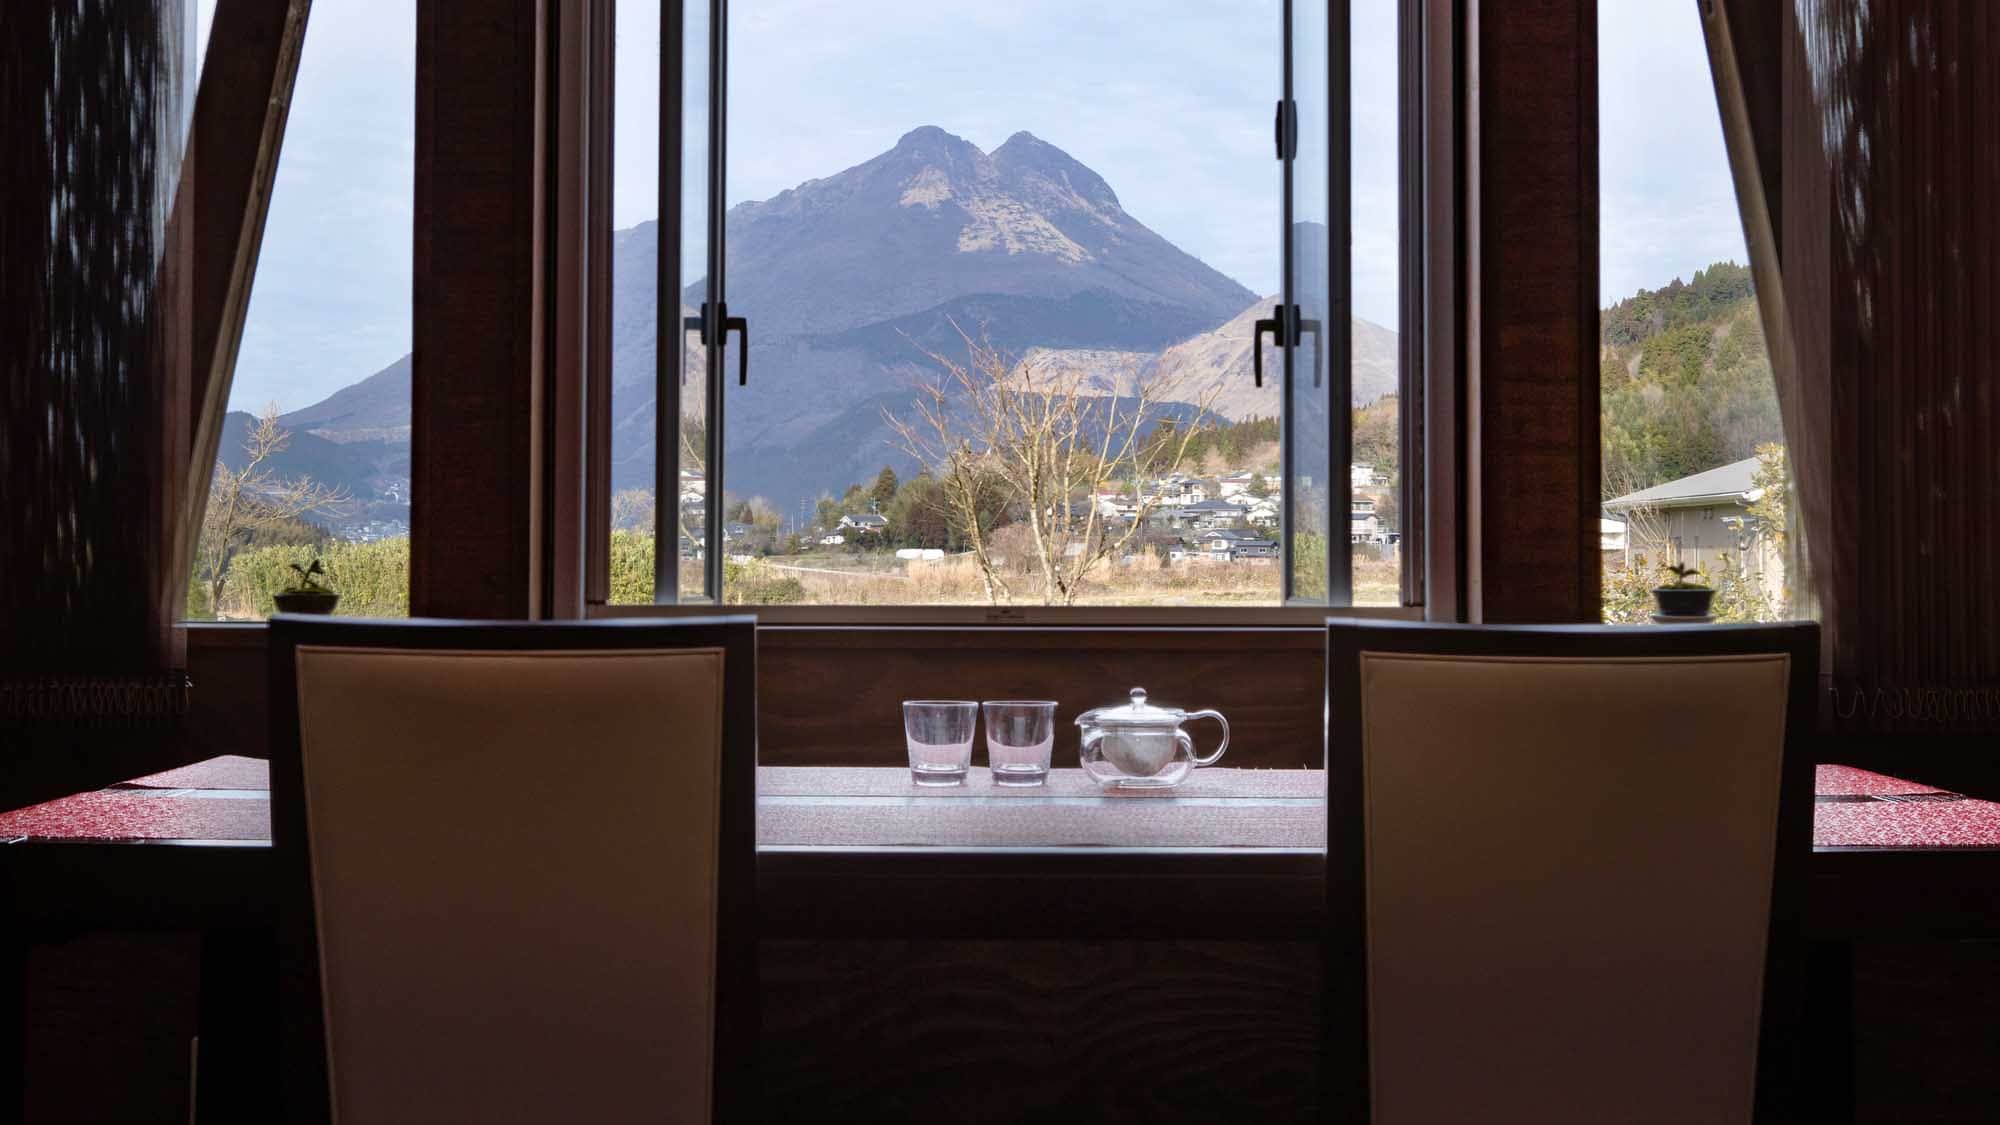 [Restaurant] Scenery from the window